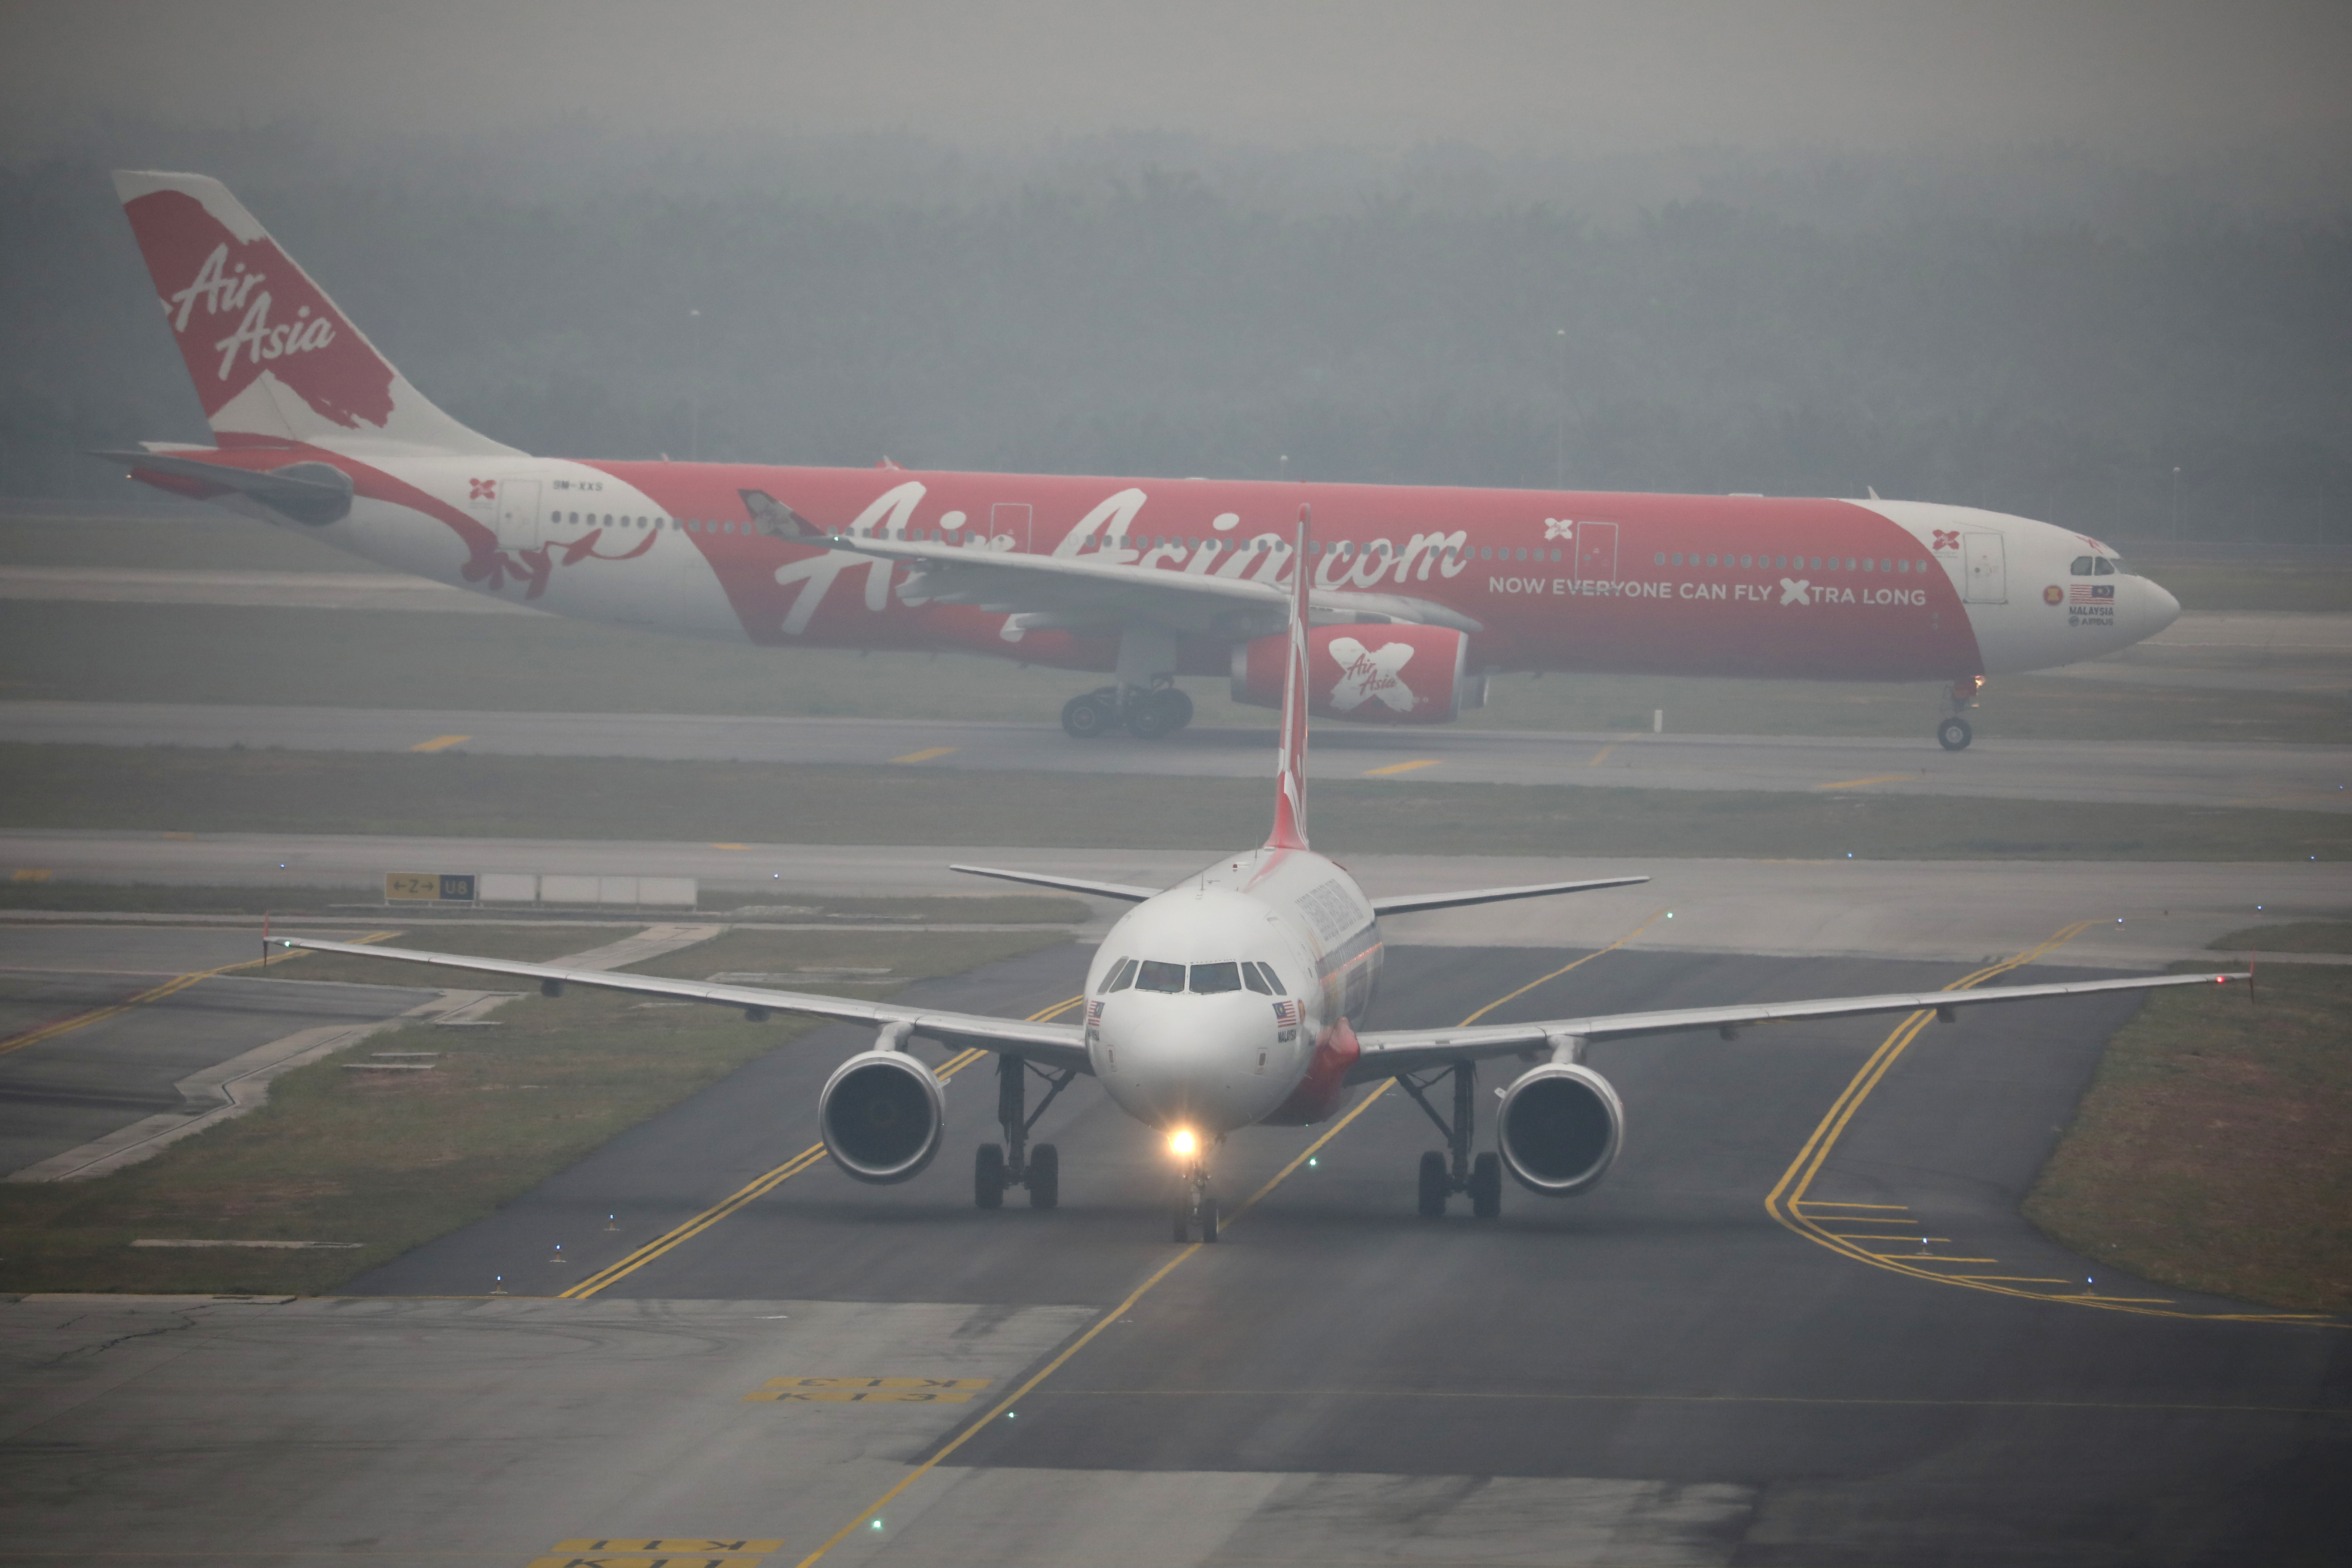 Air Asia airplanes are pictured on the haze-shrouded tarmac at Kuala Lumpur International Airport 2 in Sepang